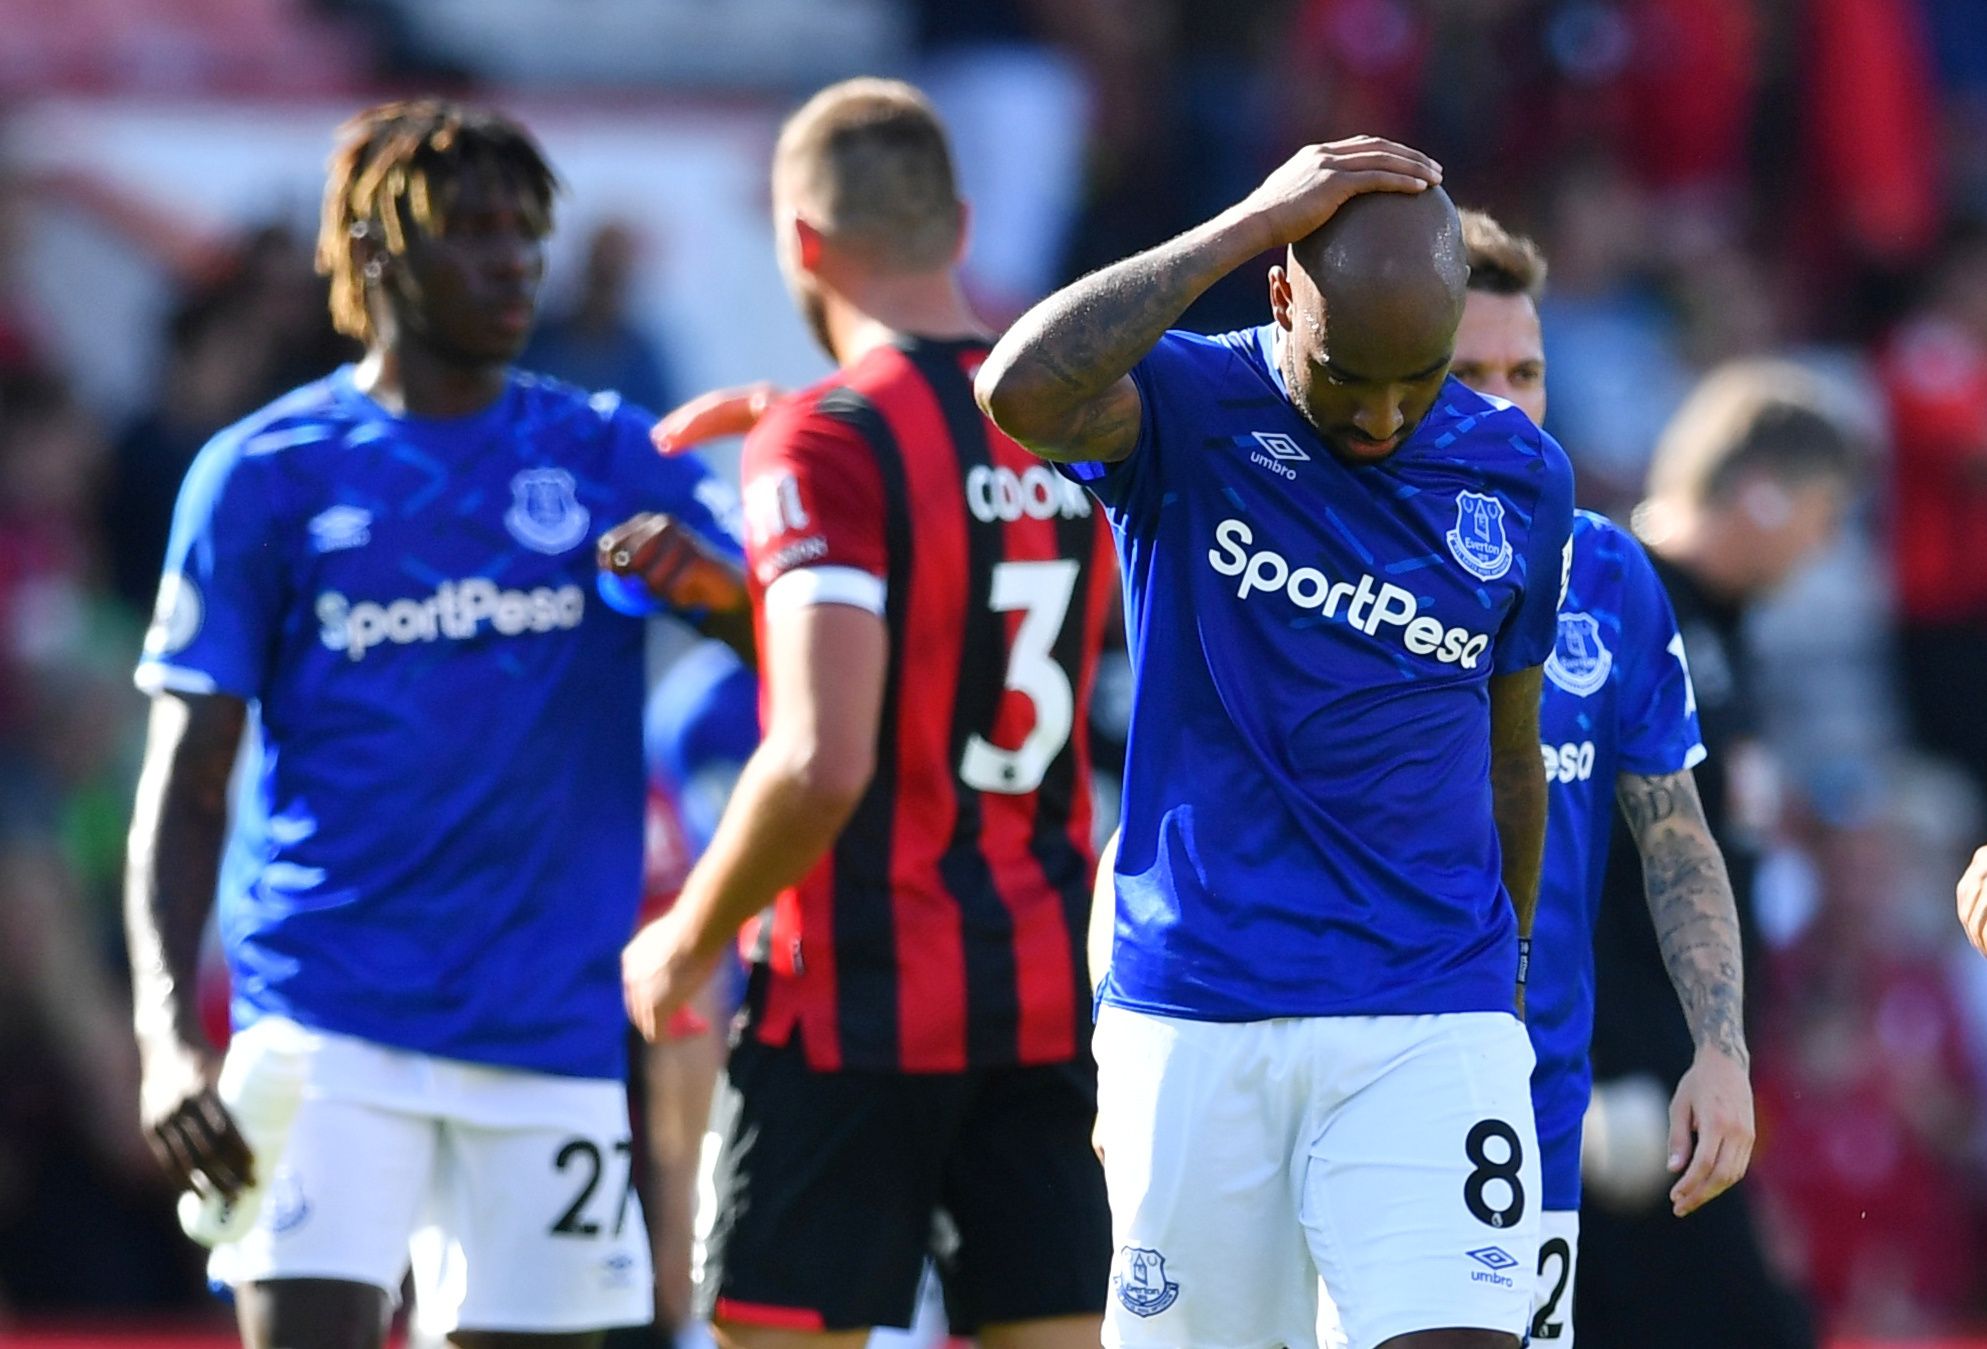 Soccer Football - Premier League - AFC Bournemouth v Everton - Vitality Stadium, Bournemouth, Britain - September 15, 2019  Everton's Fabian Delph looks dejected after the match  REUTERS/Dylan Martinez  EDITORIAL USE ONLY. No use with unauthorized audio, video, data, fixture lists, club/league logos or 